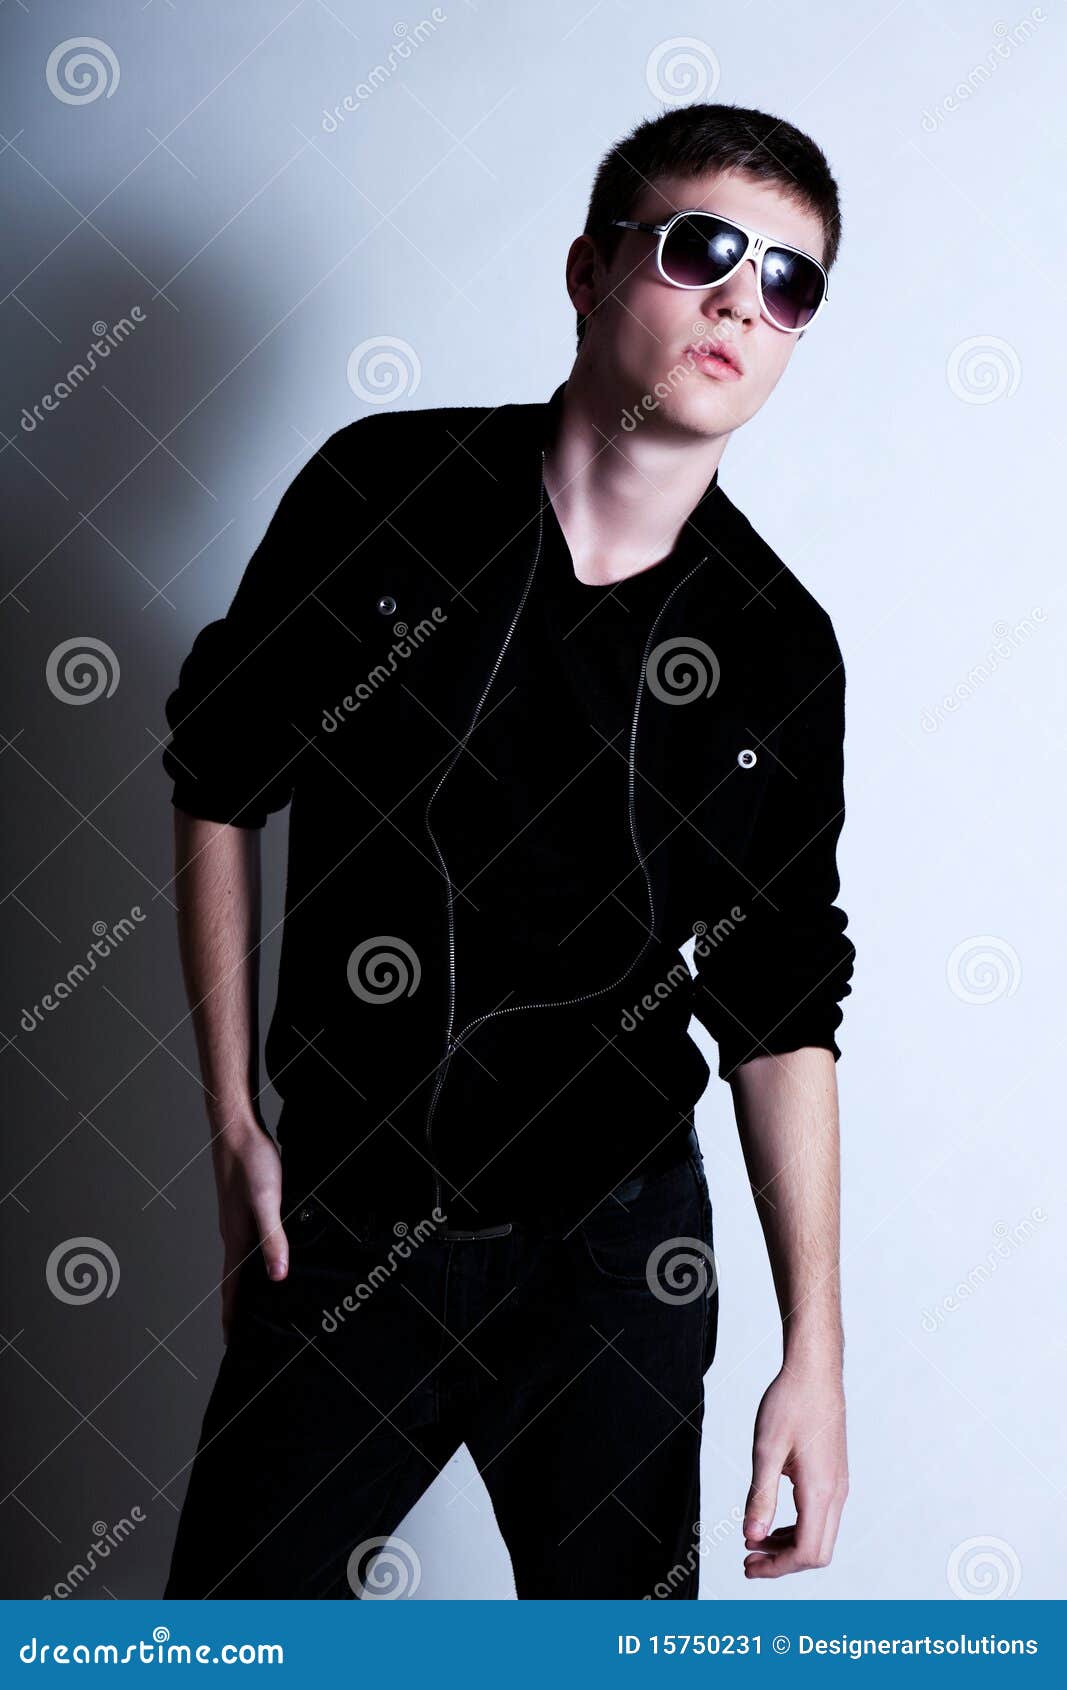 Male Teen Looking Cool In Sunglasses Stock Image - Image 